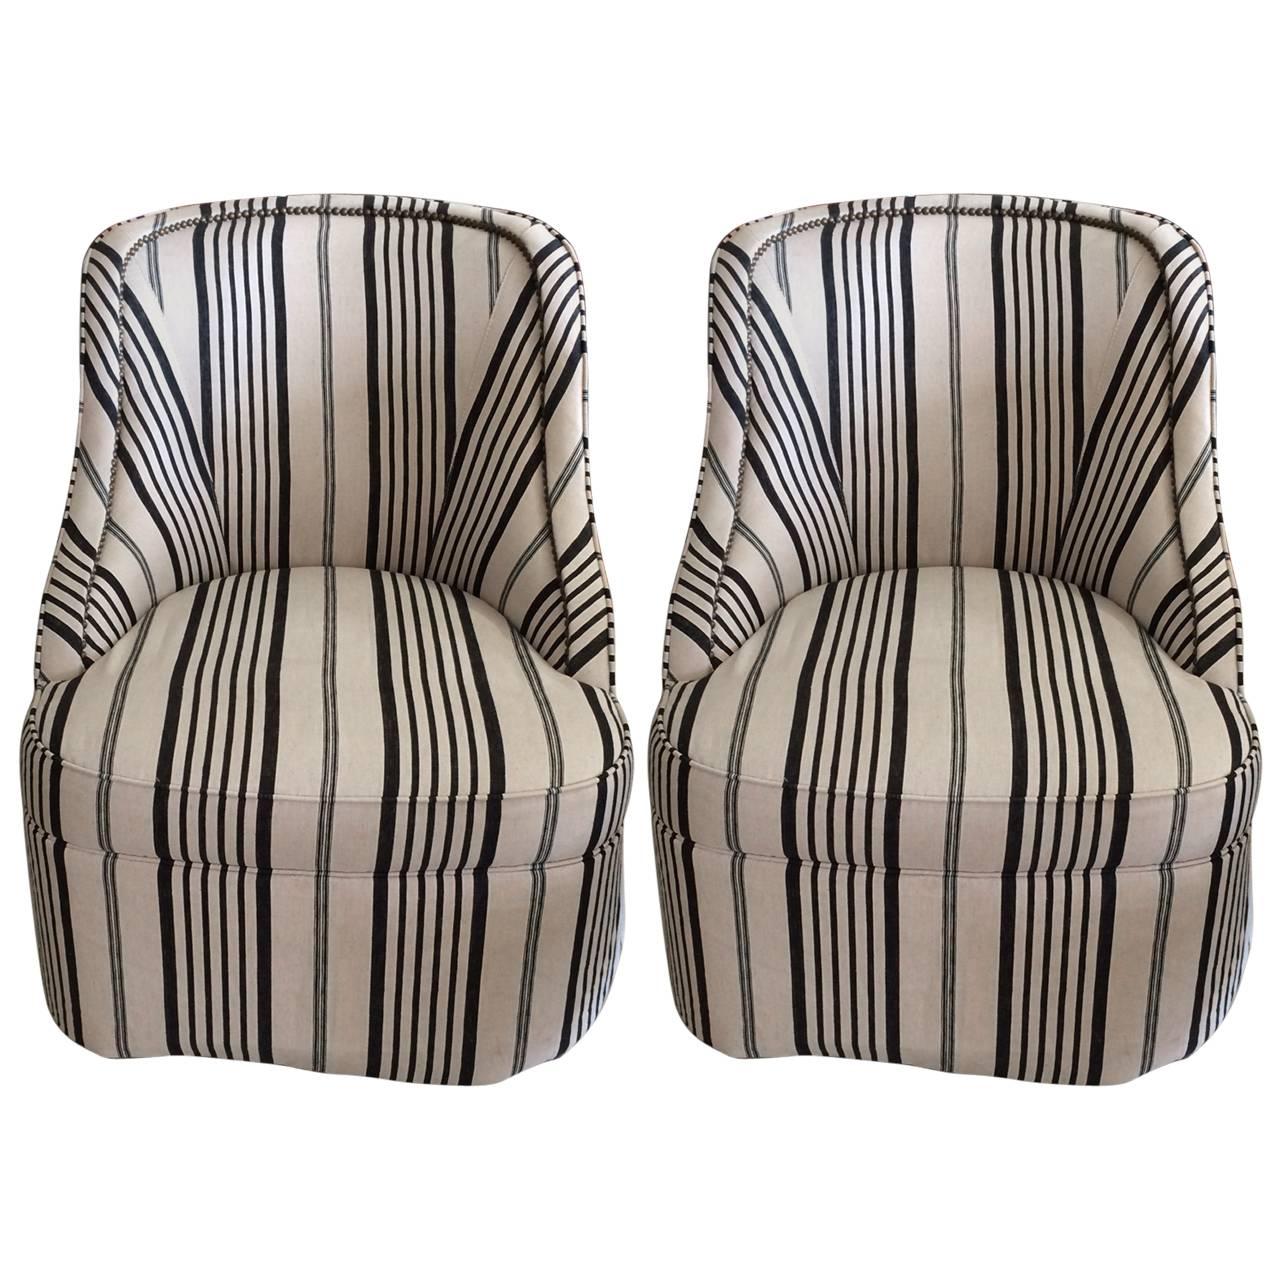 Stylish Comfy Upholstered Striped Club Chairs